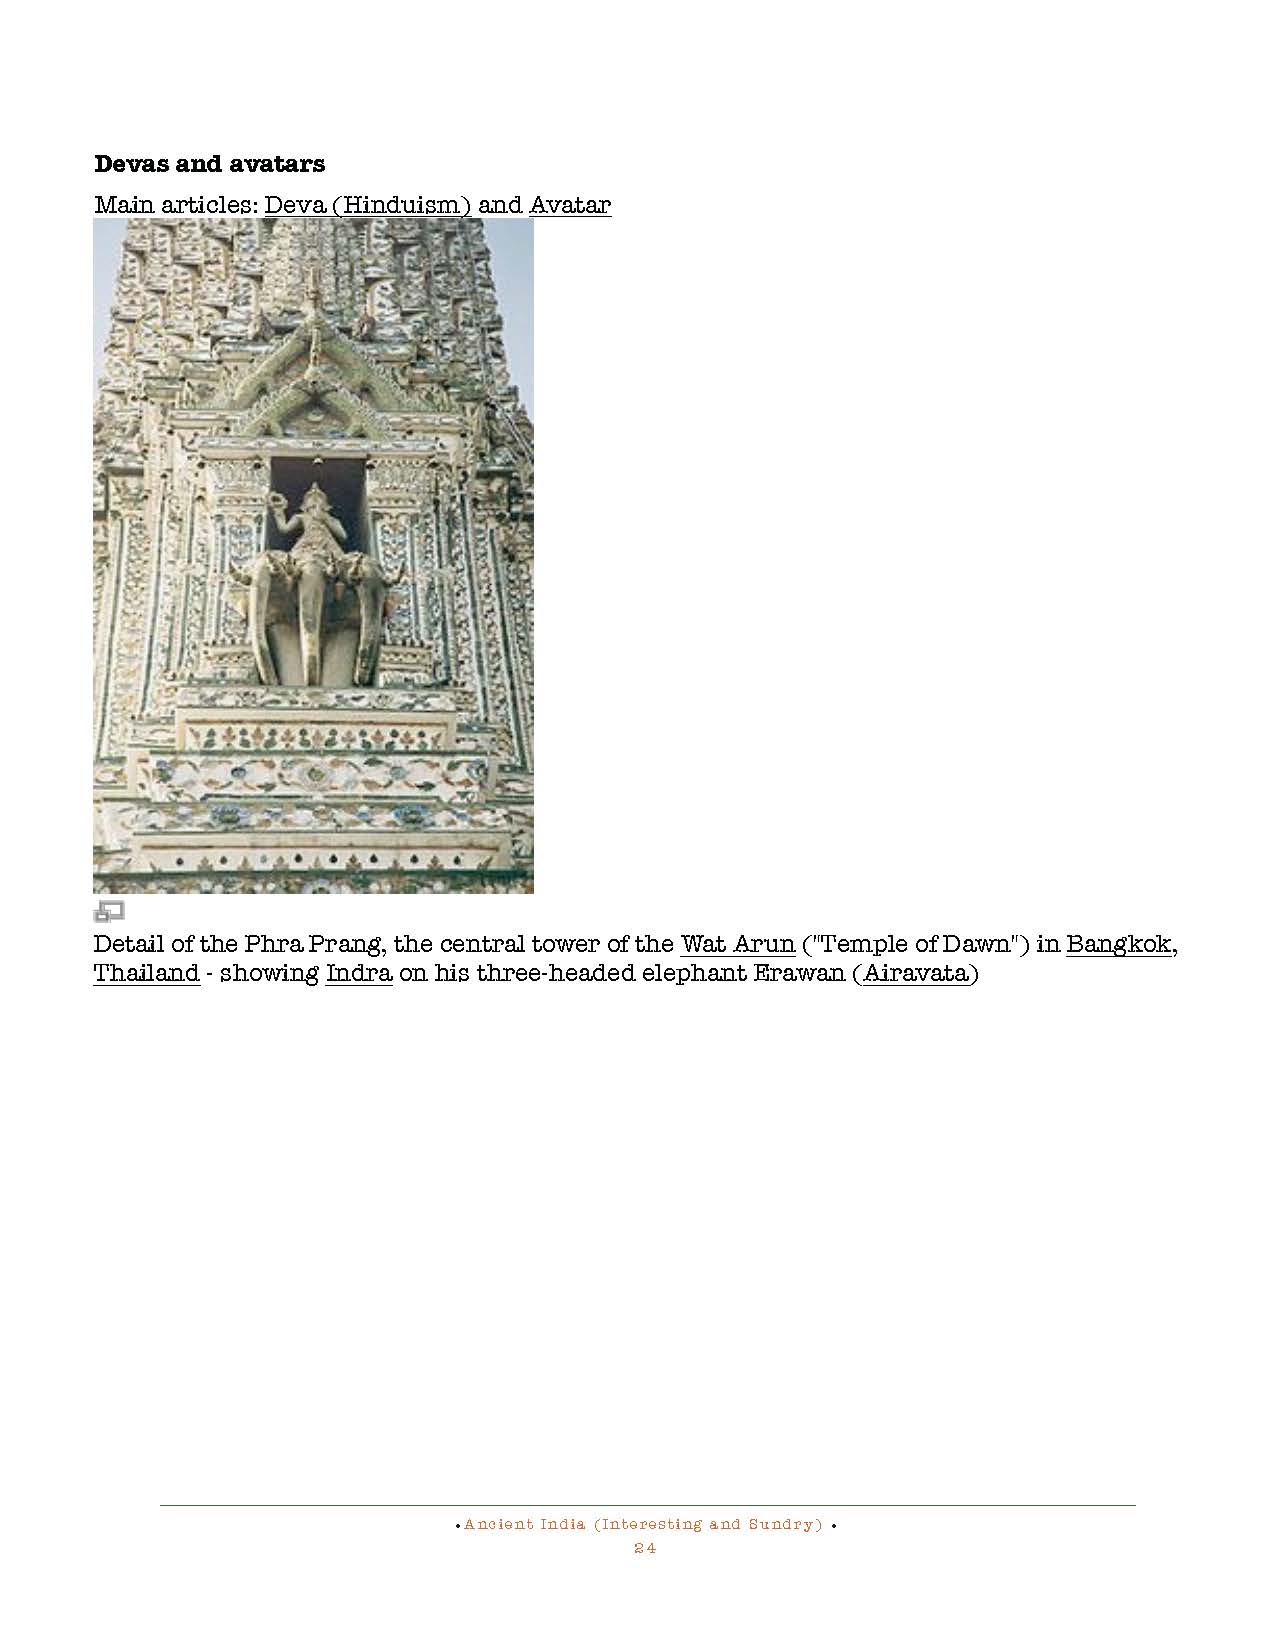 HOCE- Ancient India Notes (Other Interesting and Sundry)_Page_024.jpg